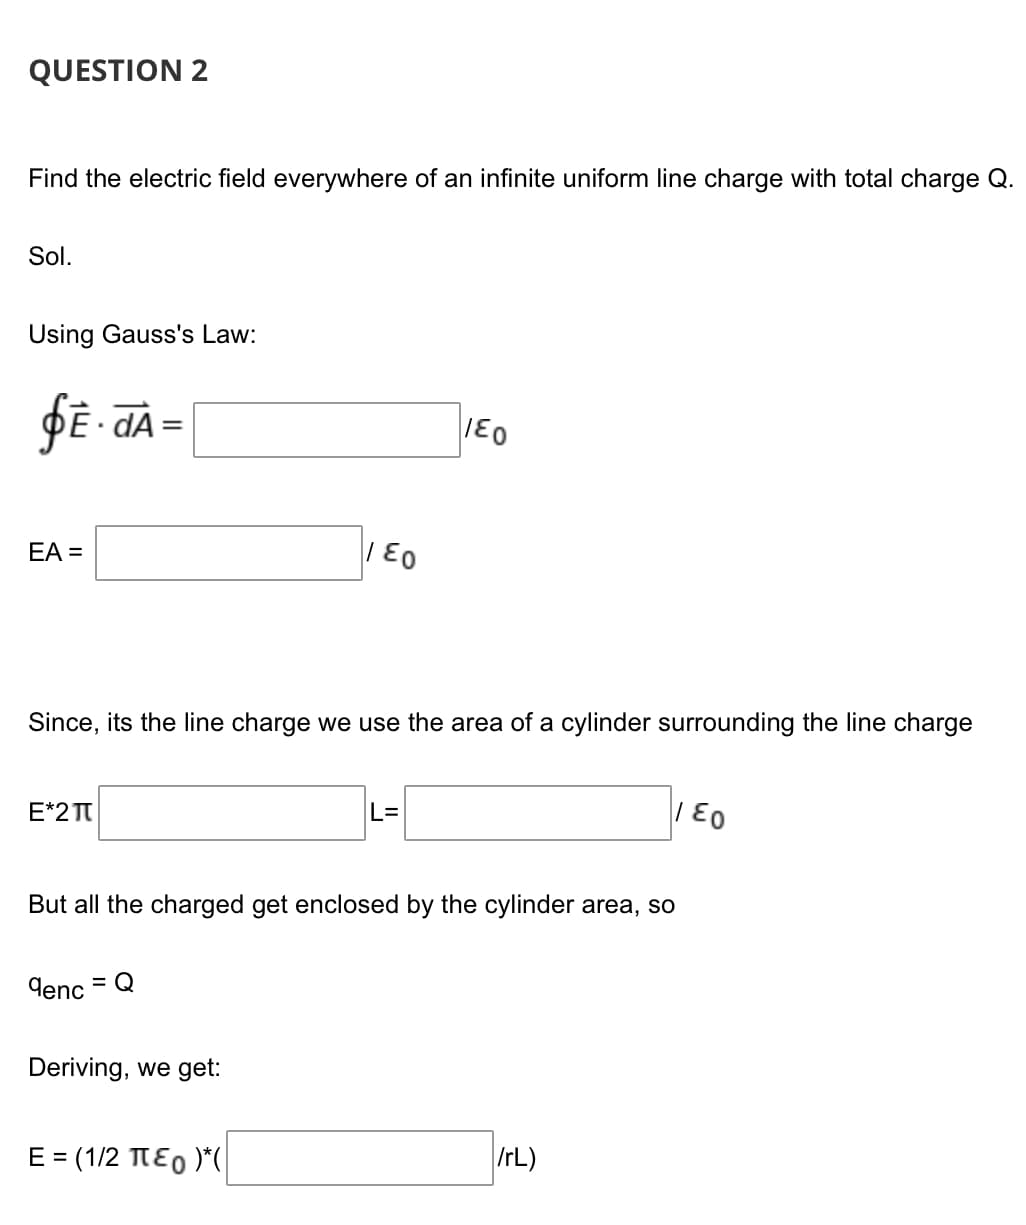 QUESTION 2
Find the electric field everywhere of an infinite uniform line charge with total charge Q.
Sol.
Using Gauss's Law:
DE dA
%3D
EA =
| E0
Since, its the line charge we use the area of a cylinder surrounding the line charge
E*2 TT
L=
But all the charged get enclosed by the cylinder area, so
denc
= Q
Deriving, we get:
E = (1/2 TE0 )*(|
IrL)
